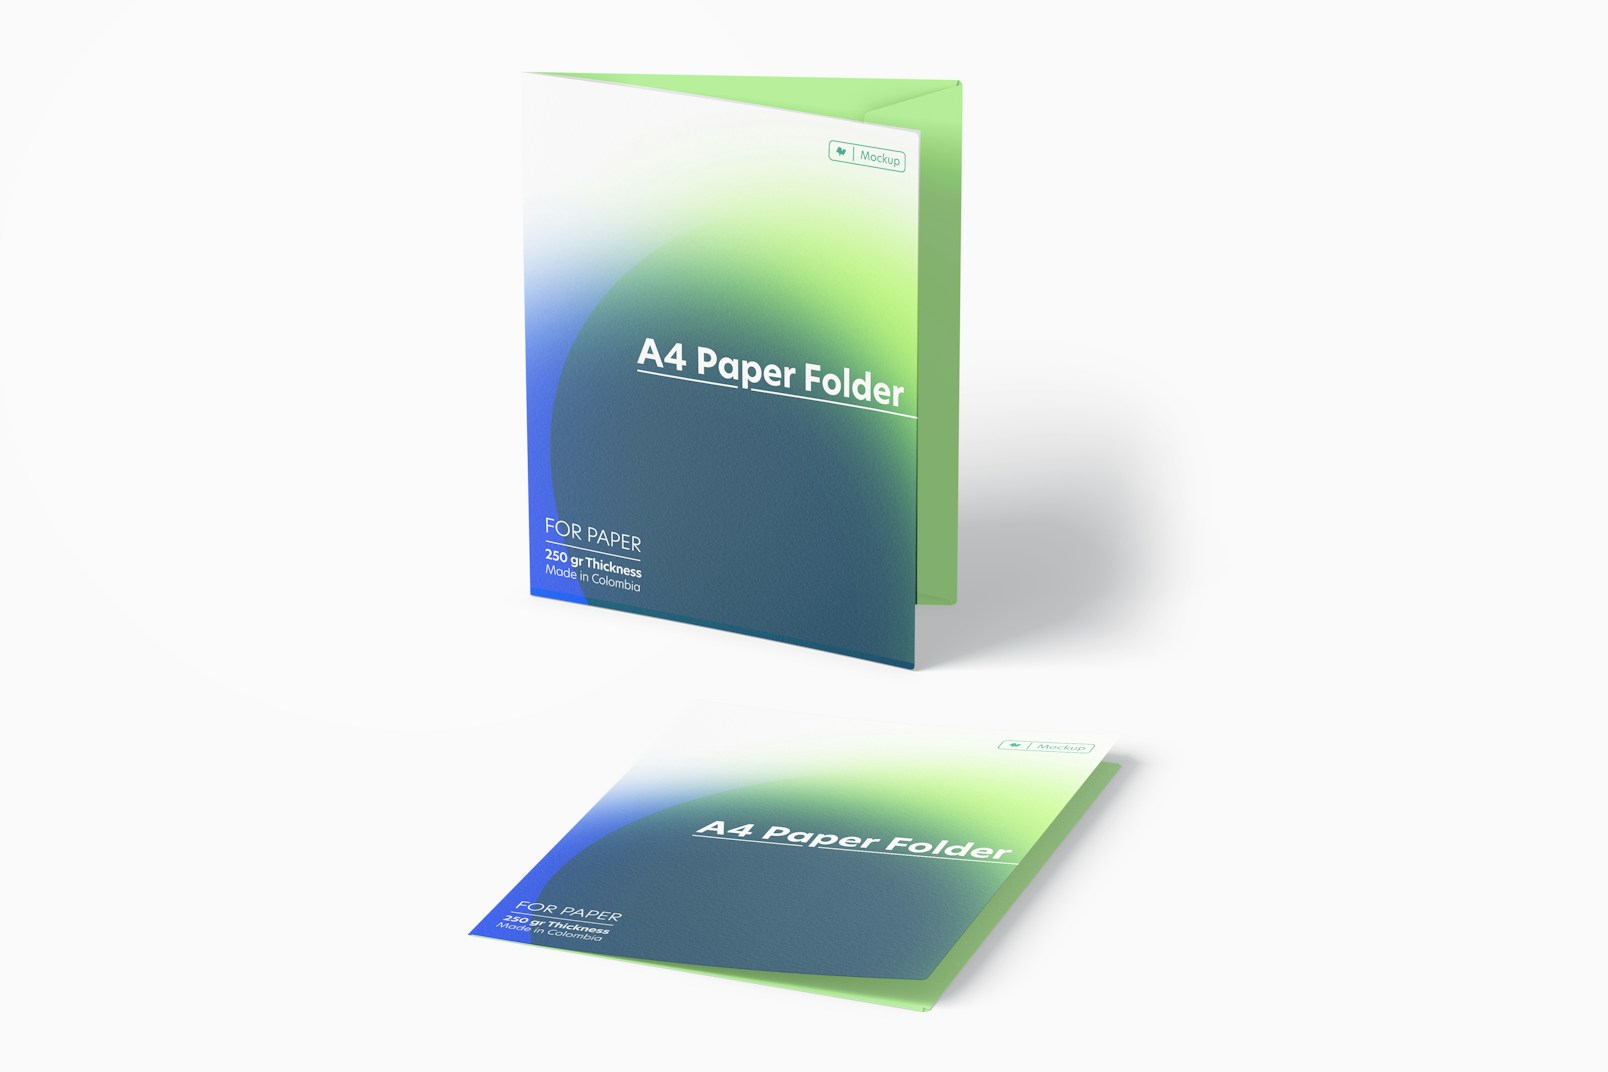 A4 Paper Folder Mockup, Standing and Dropped